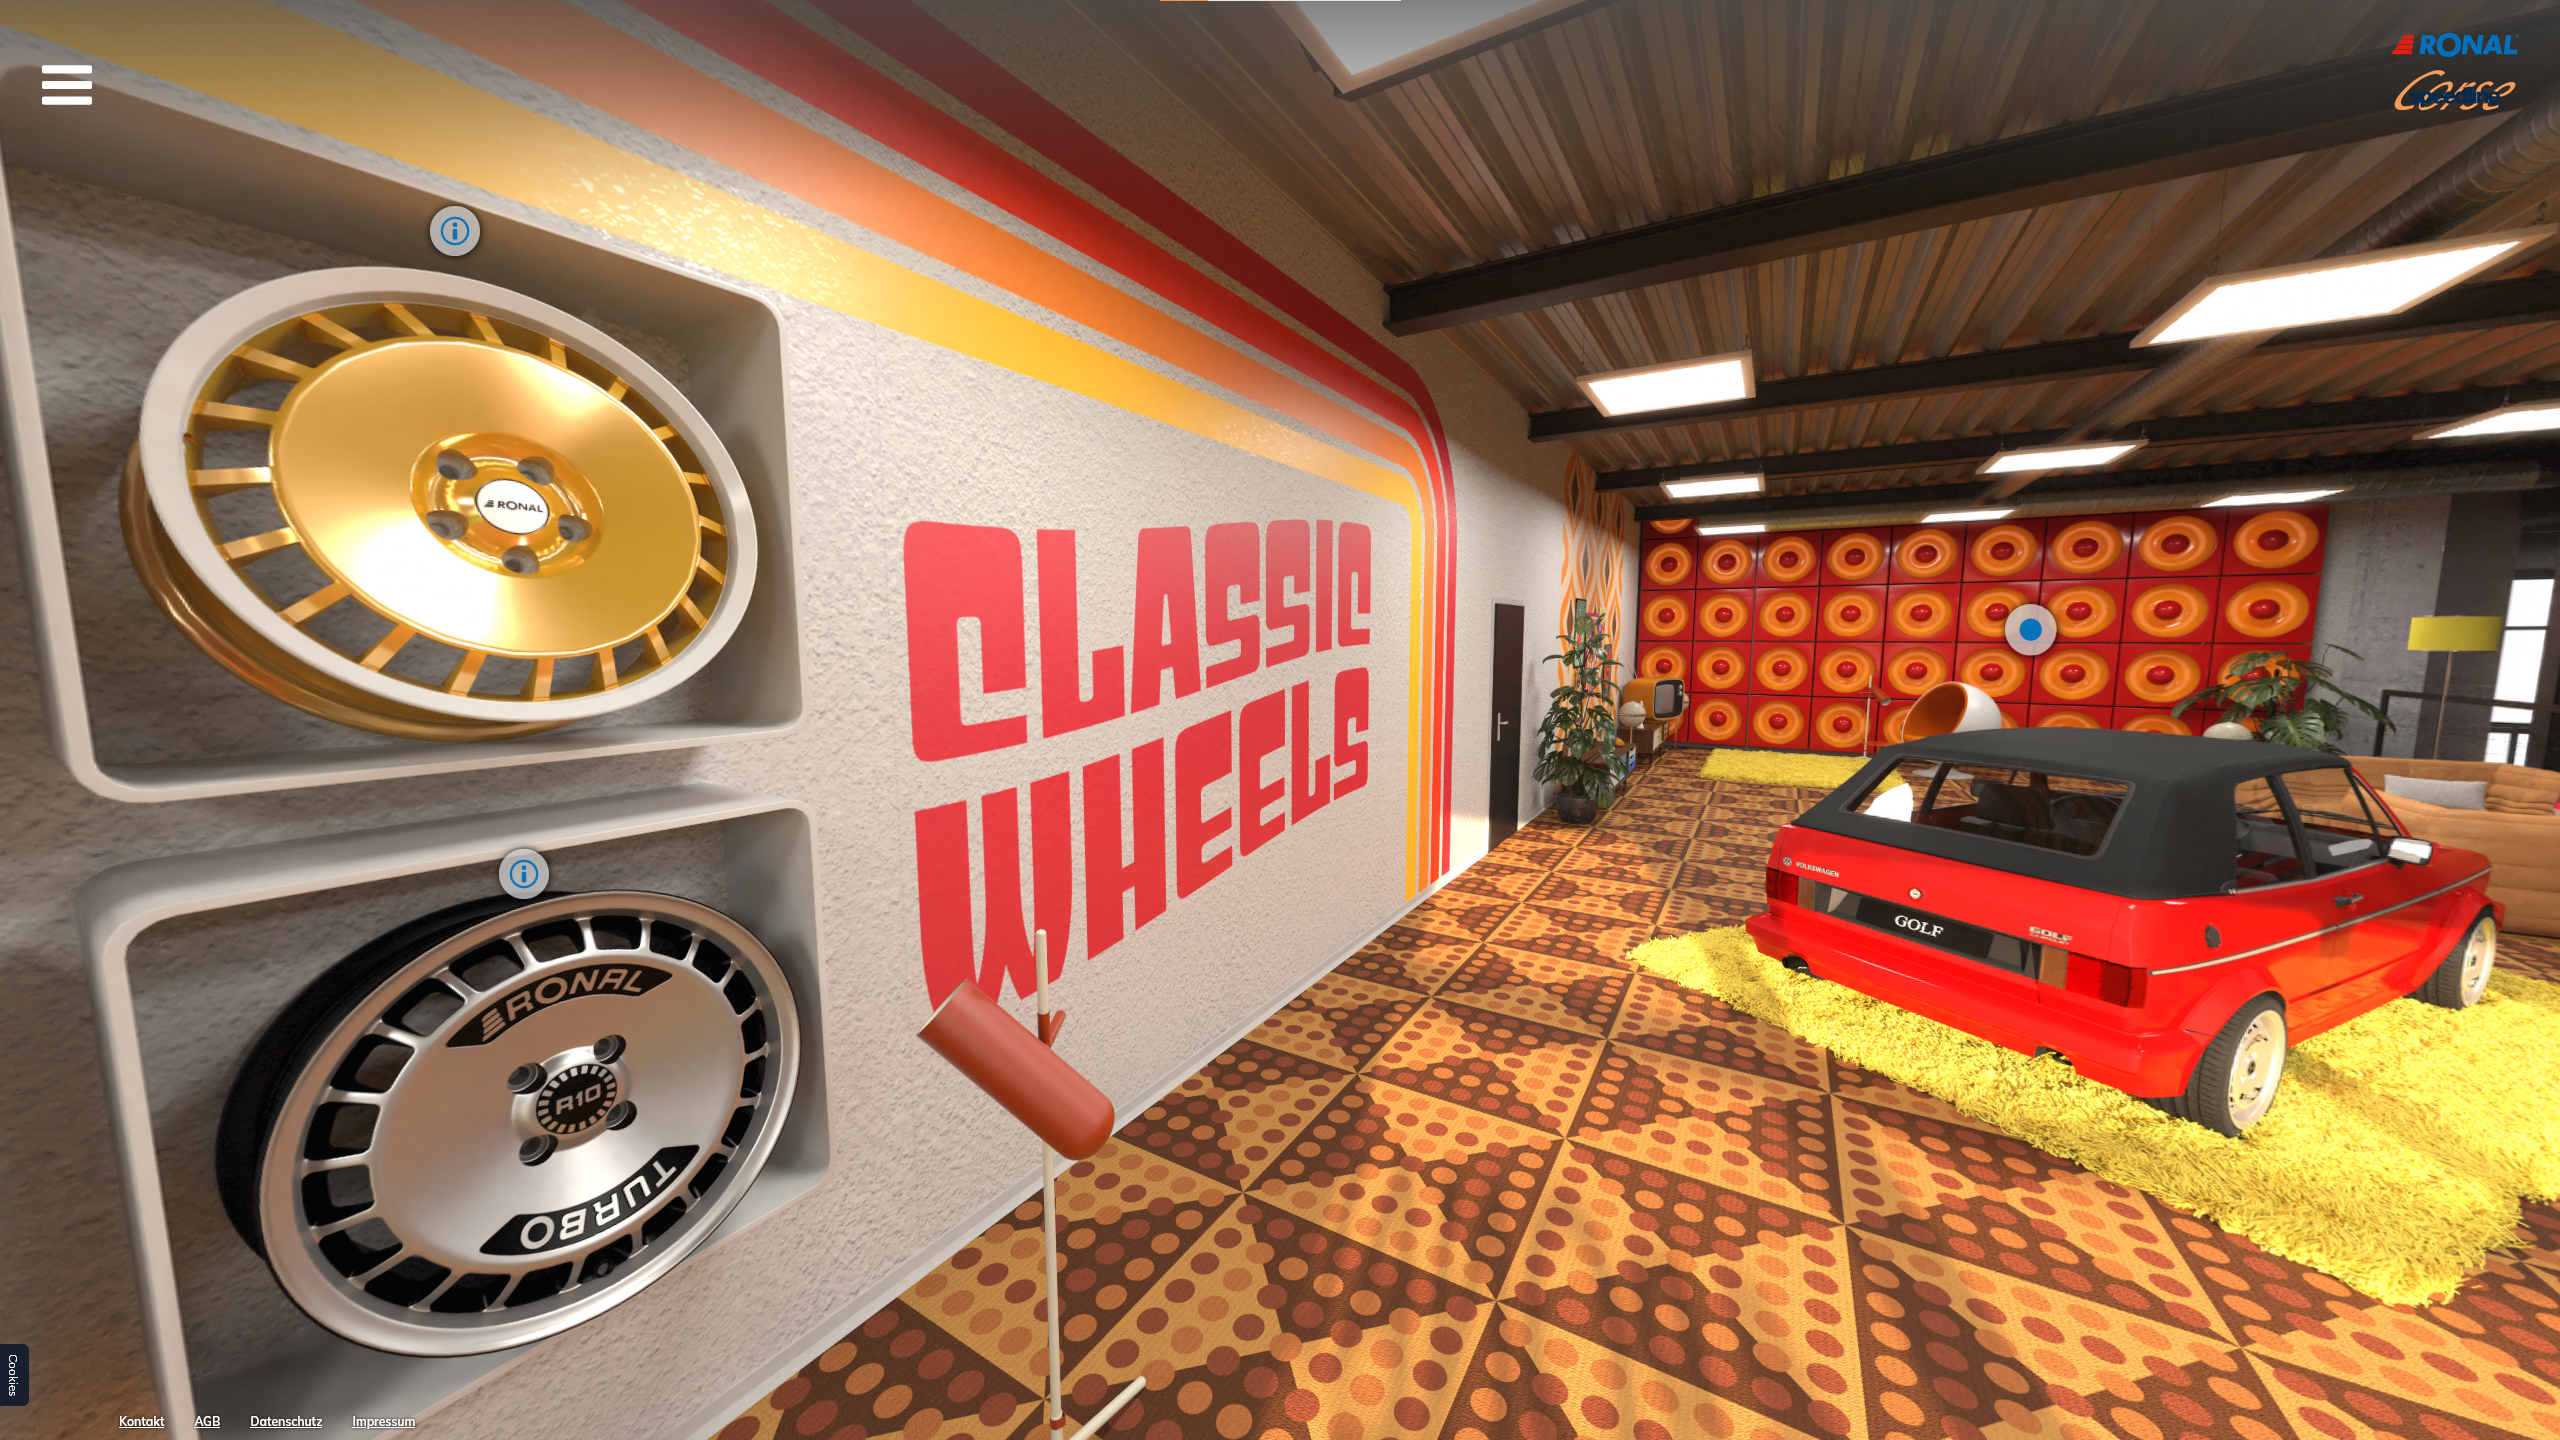 RONAL_Campus_ClassicRoom-Wheels